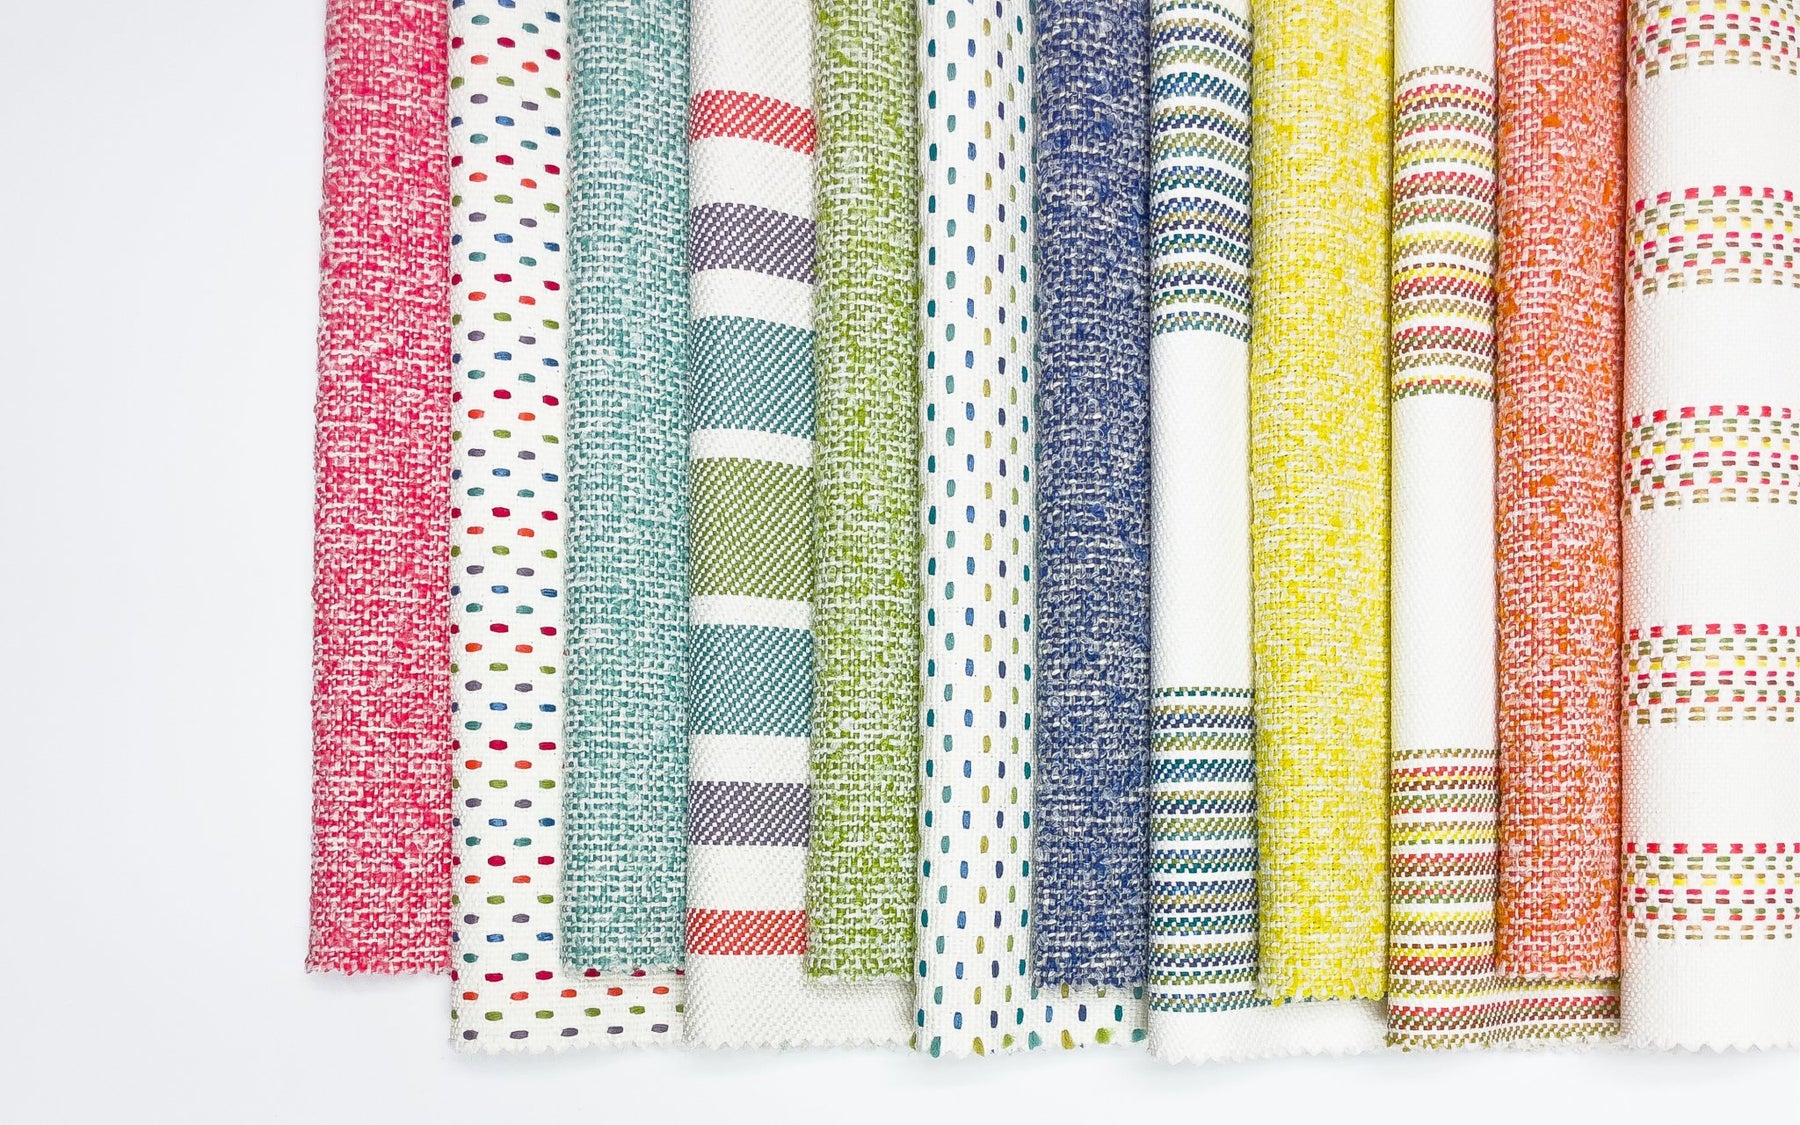 What are the different types of textile design?